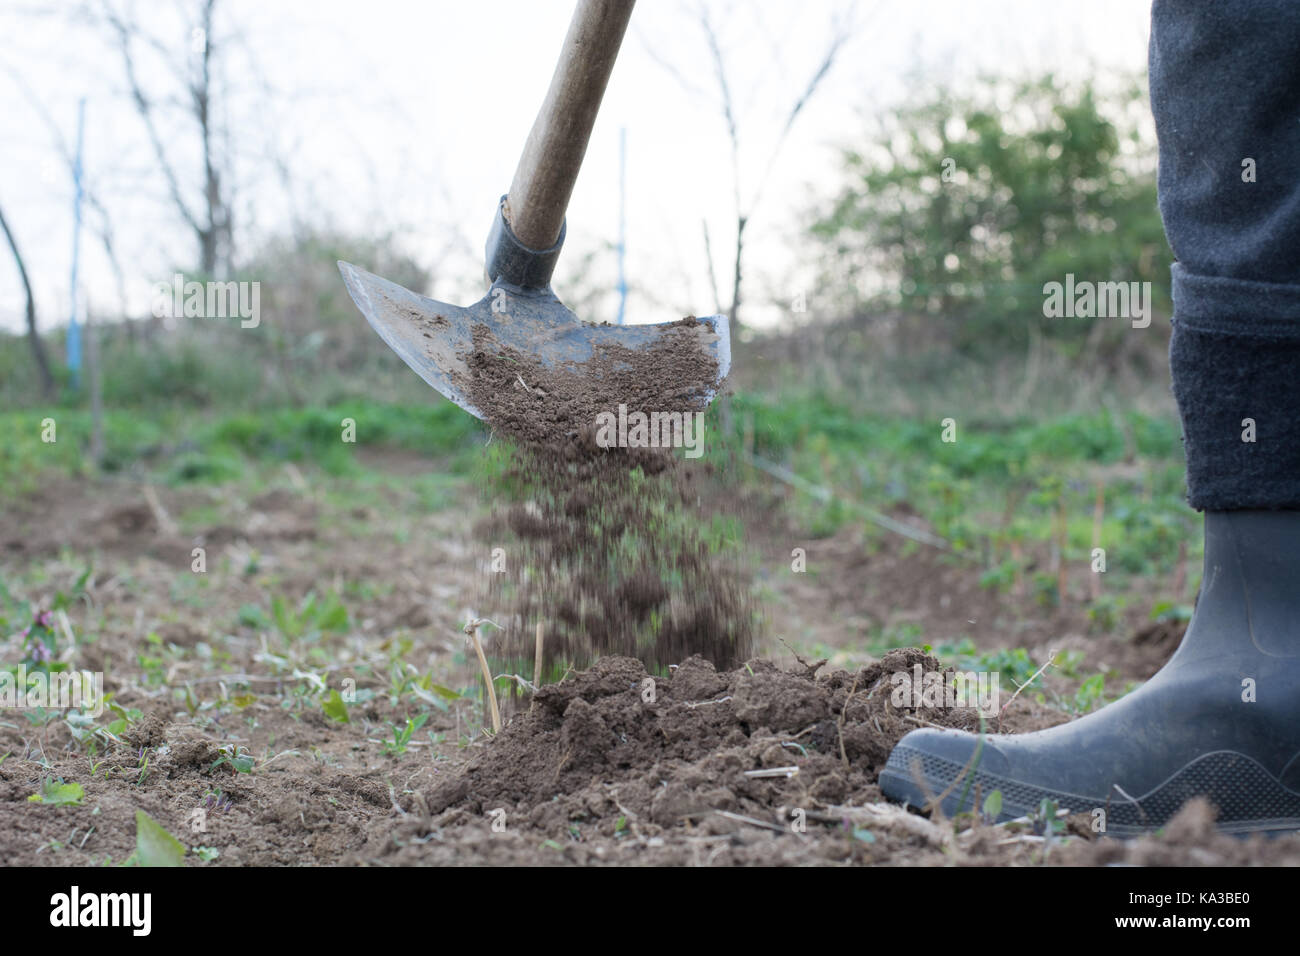 Garden hoe with movement weeding a garden area and dirt path Stock Photo